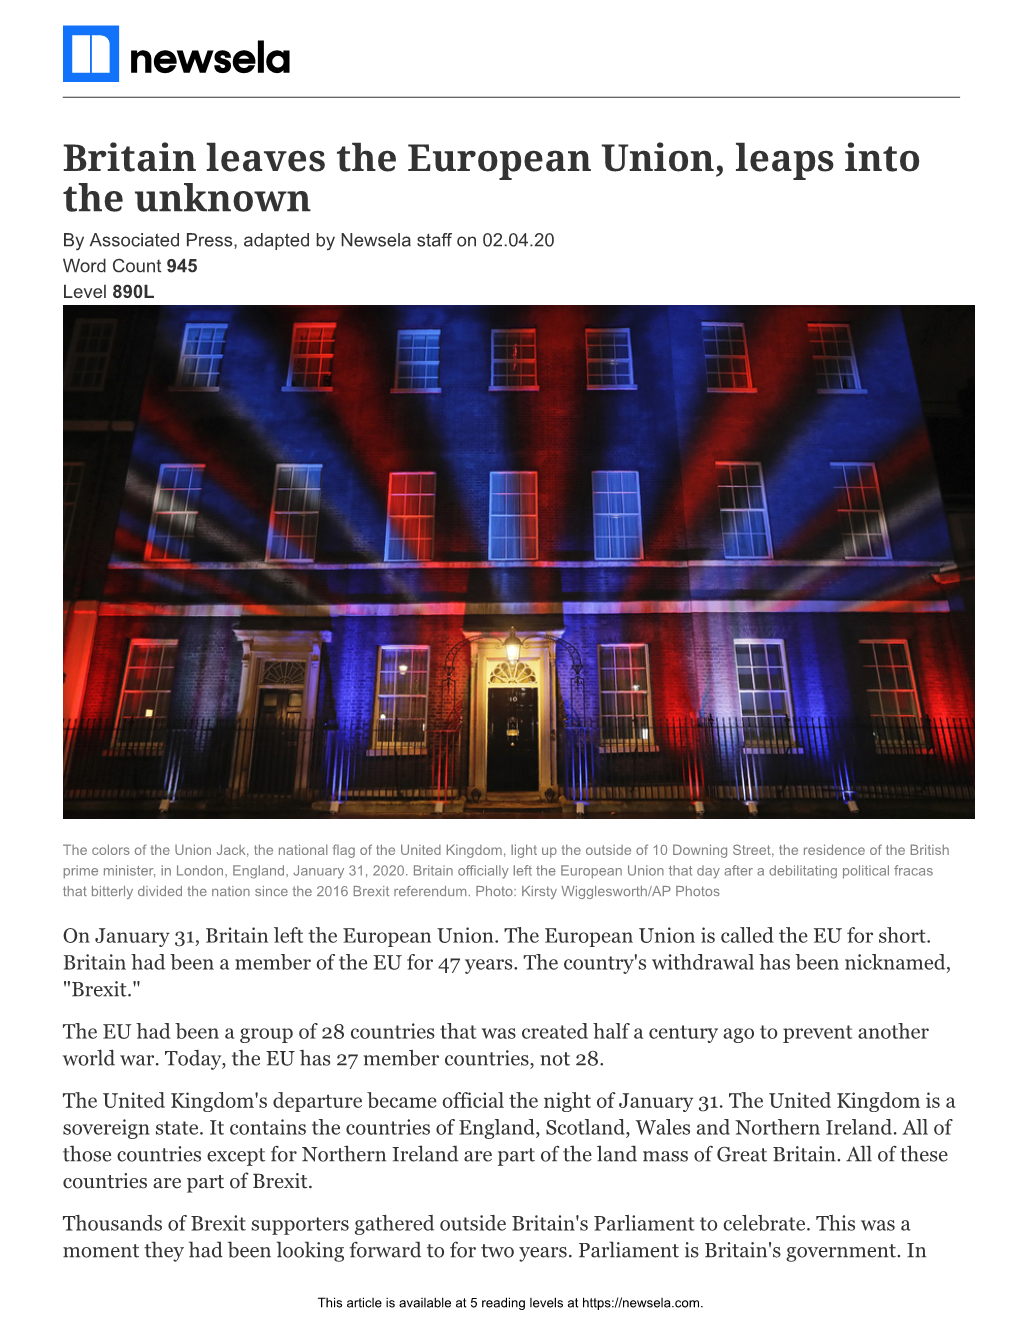 Britain Leaves the European Union, Leaps Into the Unknown by Associated Press, Adapted by Newsela Staff on 02.04.20 Word Count 945 Level 890L